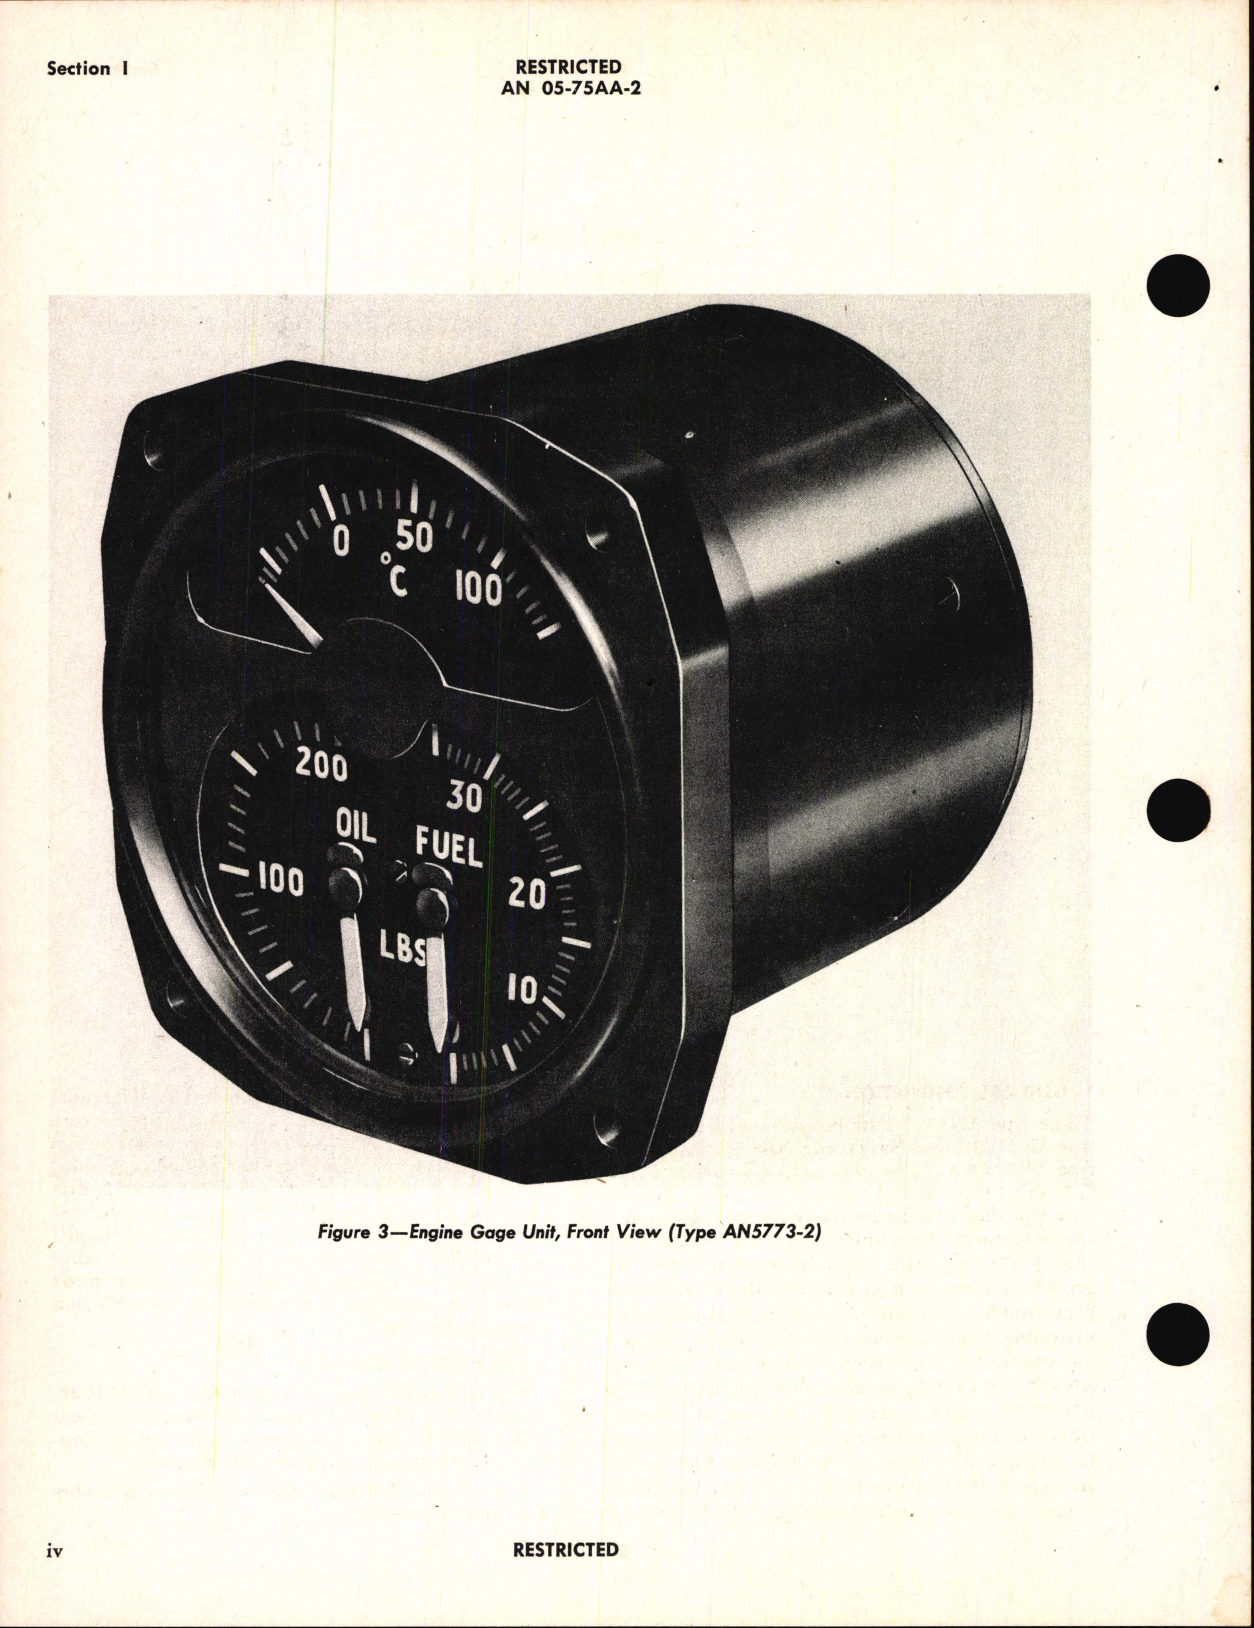 Sample page 6 from AirCorps Library document: Operation, Service, & Overhaul Instructions with Parts Catalog for Engine Gage Unit